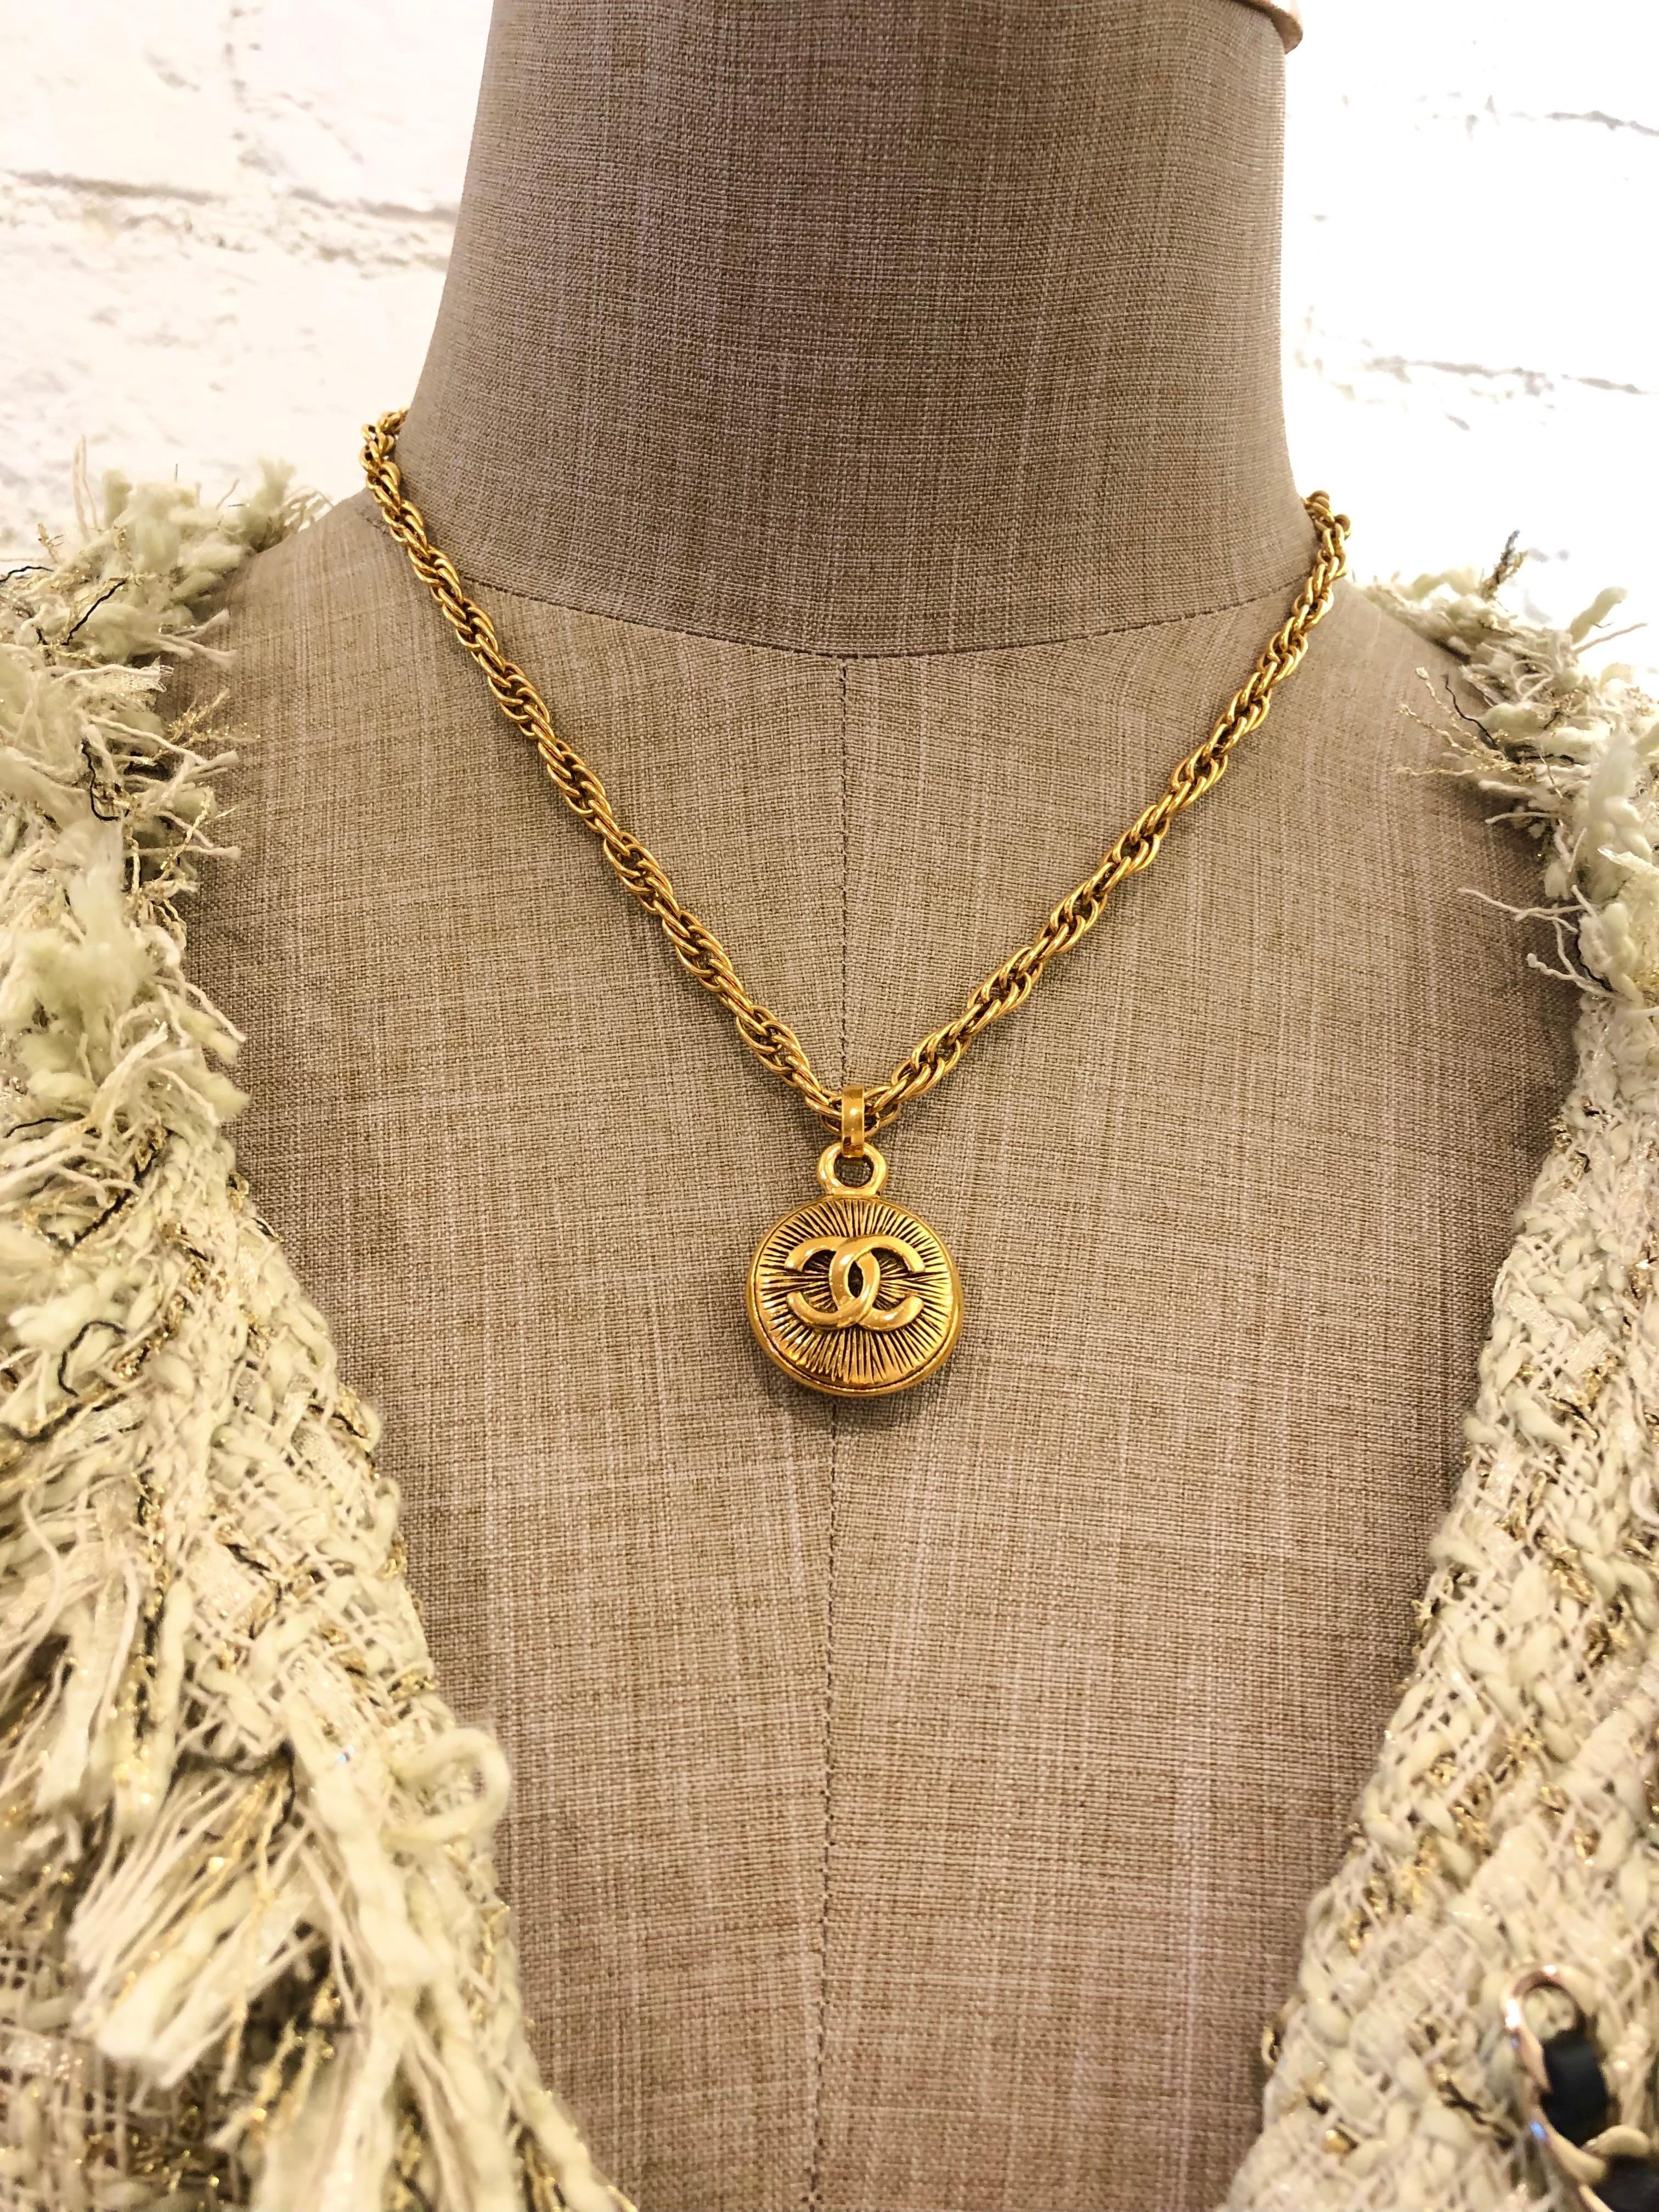 This vintage CHANEL short chain necklace is crafted of gold toned chain featuring a double-sided CC coin charm. Spring ring closure. Stamped CHANEL made in France. Measures approximately 42 cm Charm diameter 2.2 cm. Comes with box.

Condition: